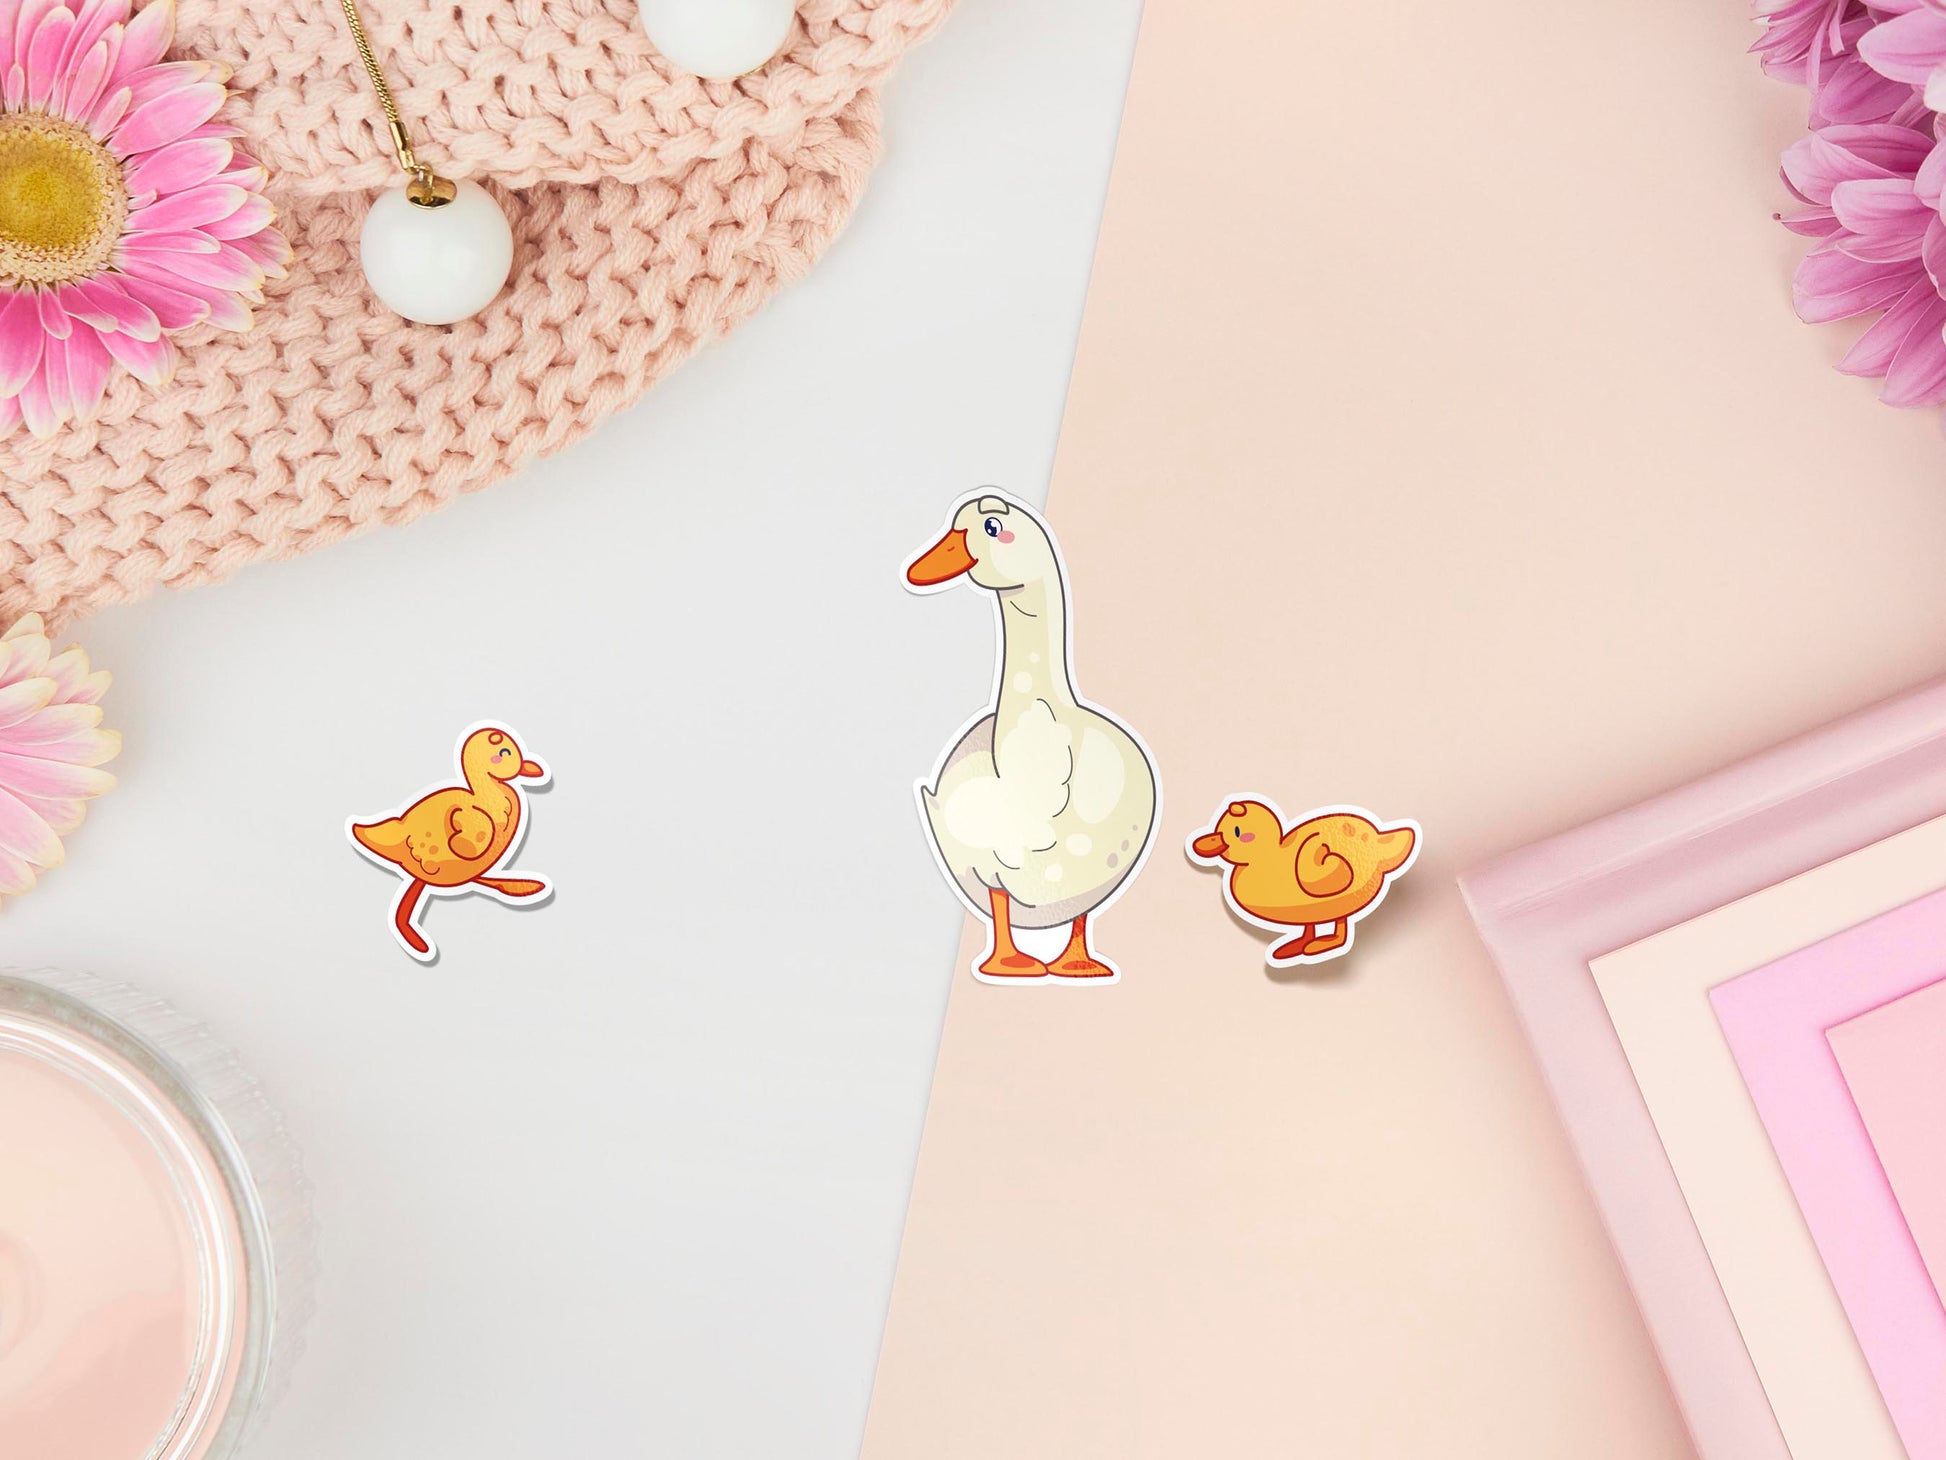 Three stickers of digitally illustrated cartoon ducks, one is a white adult duck the other are two small yellow ducklings